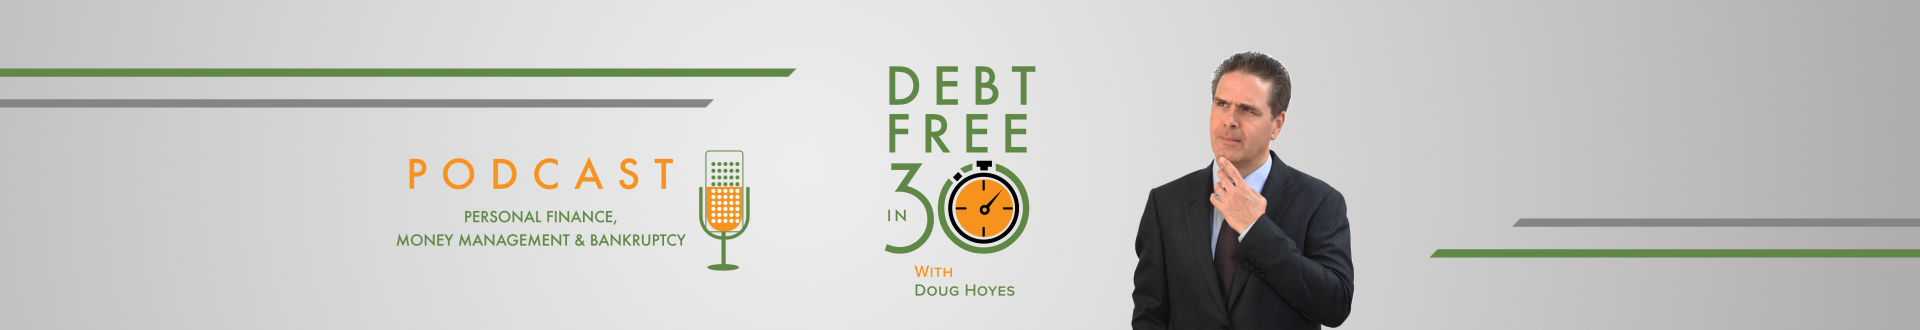 Debt Free in 30 Podcast Archive - Page 37